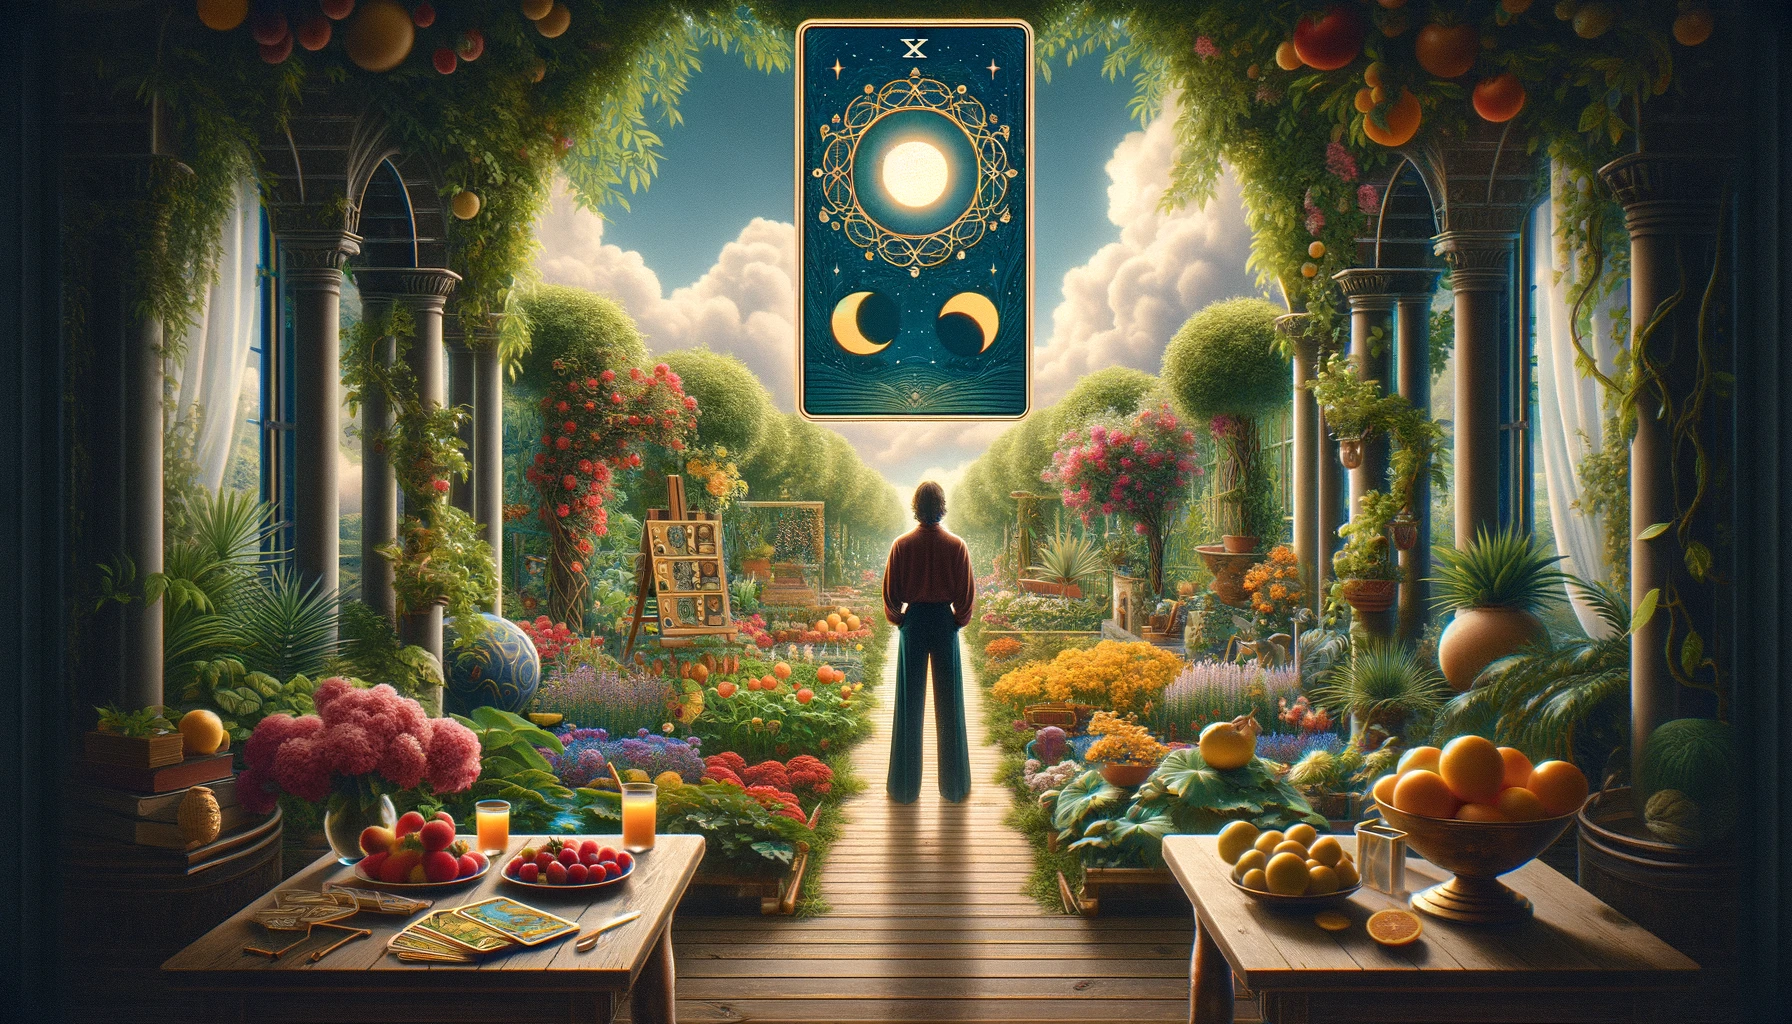 The image depicts an individual standing confidently in a lush and thriving garden or luxurious environment, surrounded by the fruits of their labor. The scene exudes a sense of independence, prosperity, and self-achievement, reflecting the person's success in creating their own thriving space. This visualization embodies themes of self-sufficiency, personal accomplishment, and the joy of enjoying life's rewards on one's own terms.